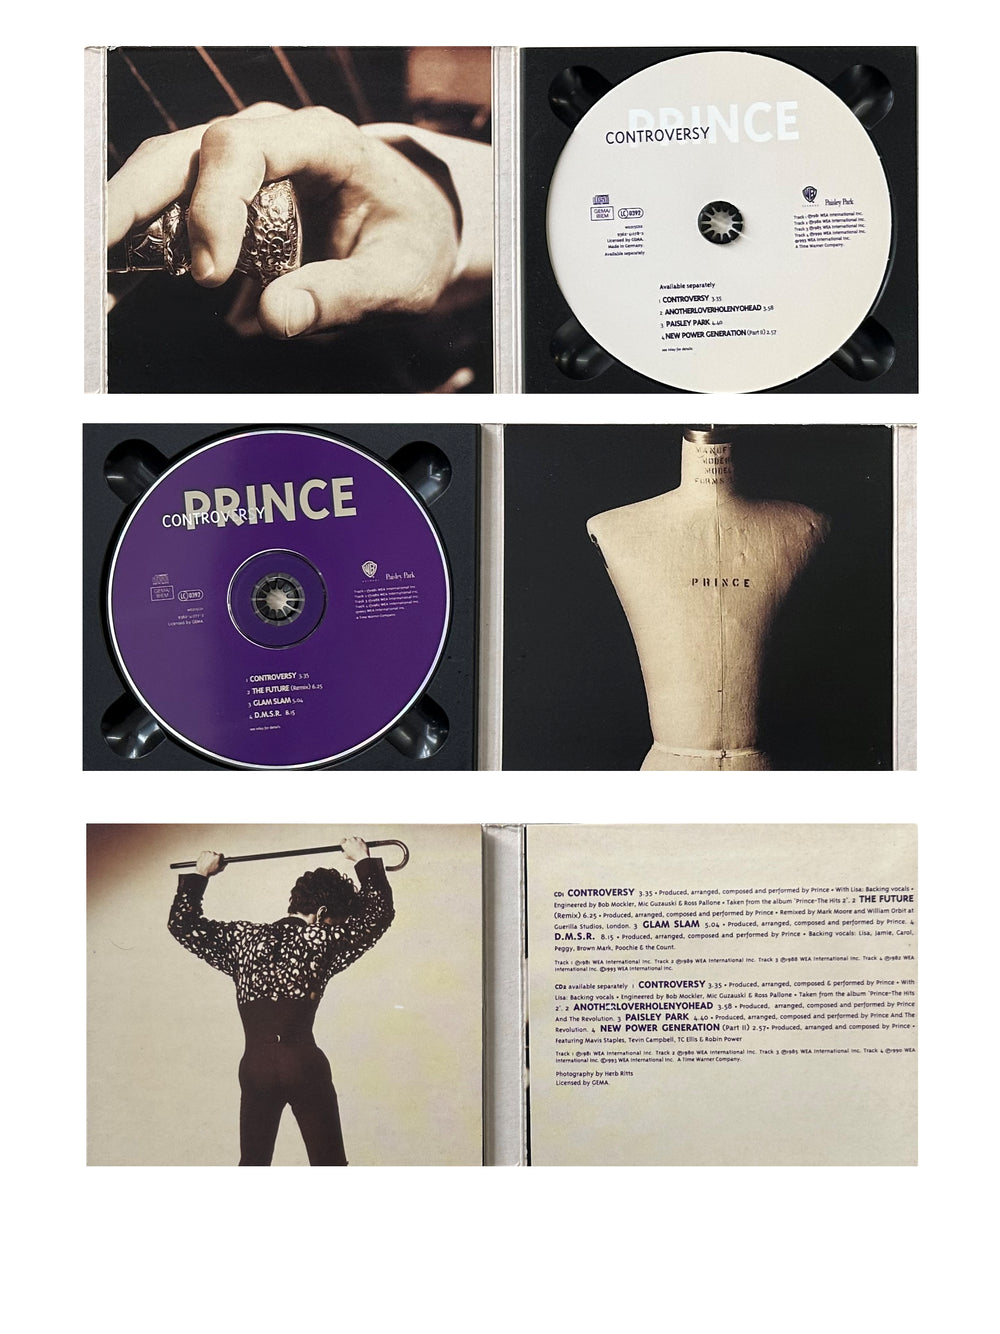 Prince – Controversy Part 1 CD Single UK Preloved:1993